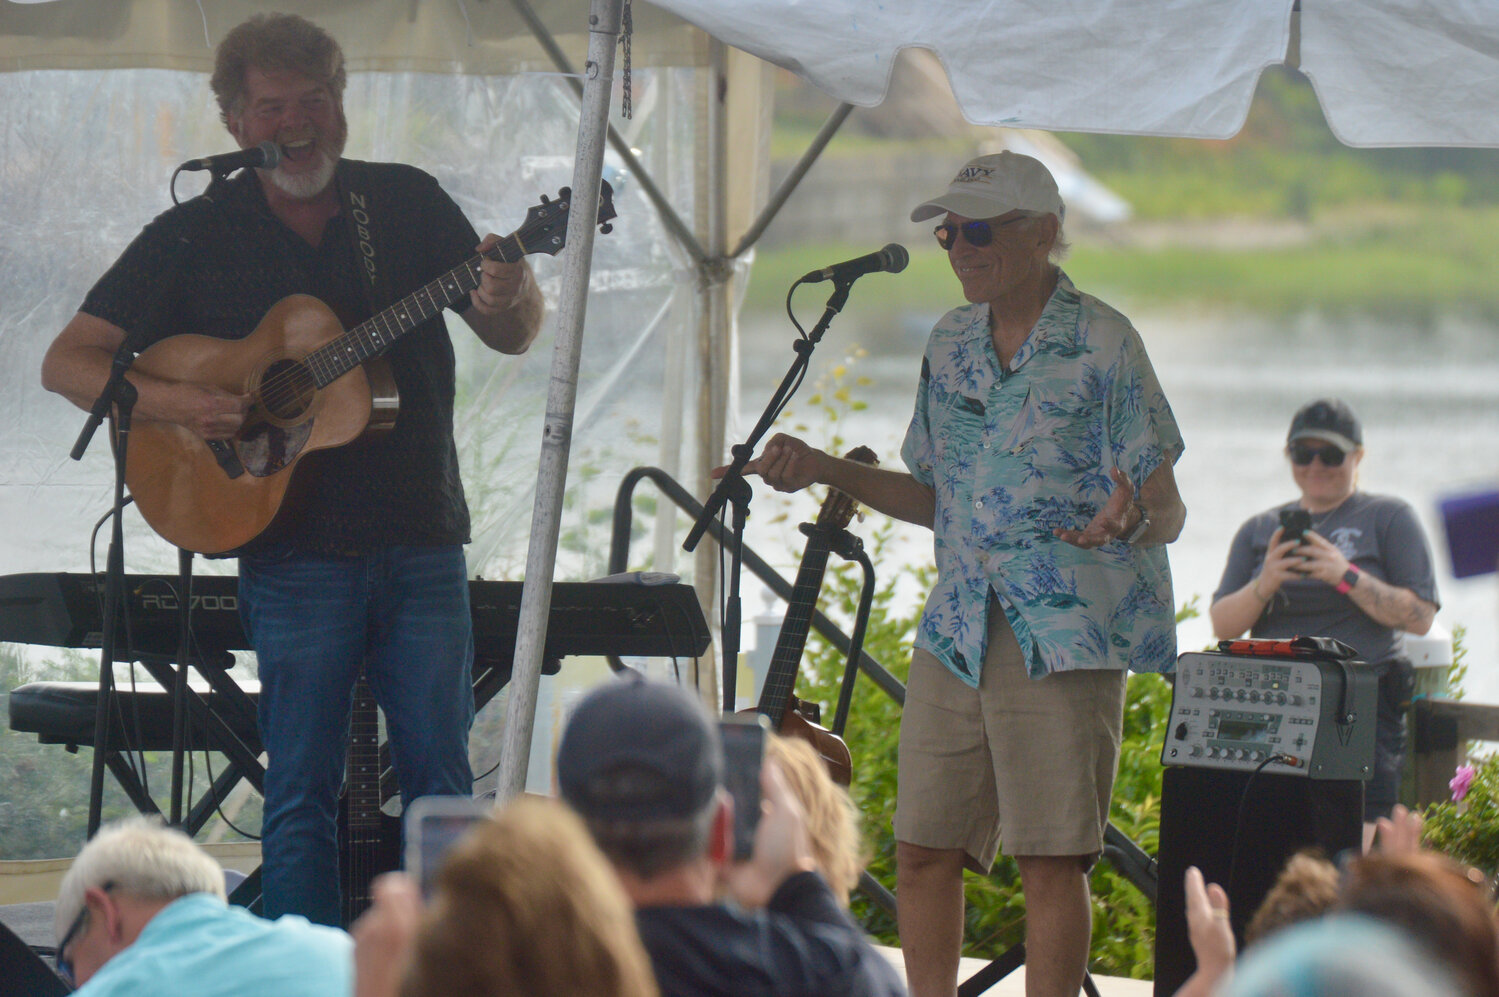 Jimmy Buffett takes to the stage to the delight of the crowd. His bandmate Mac McAnally is at left.